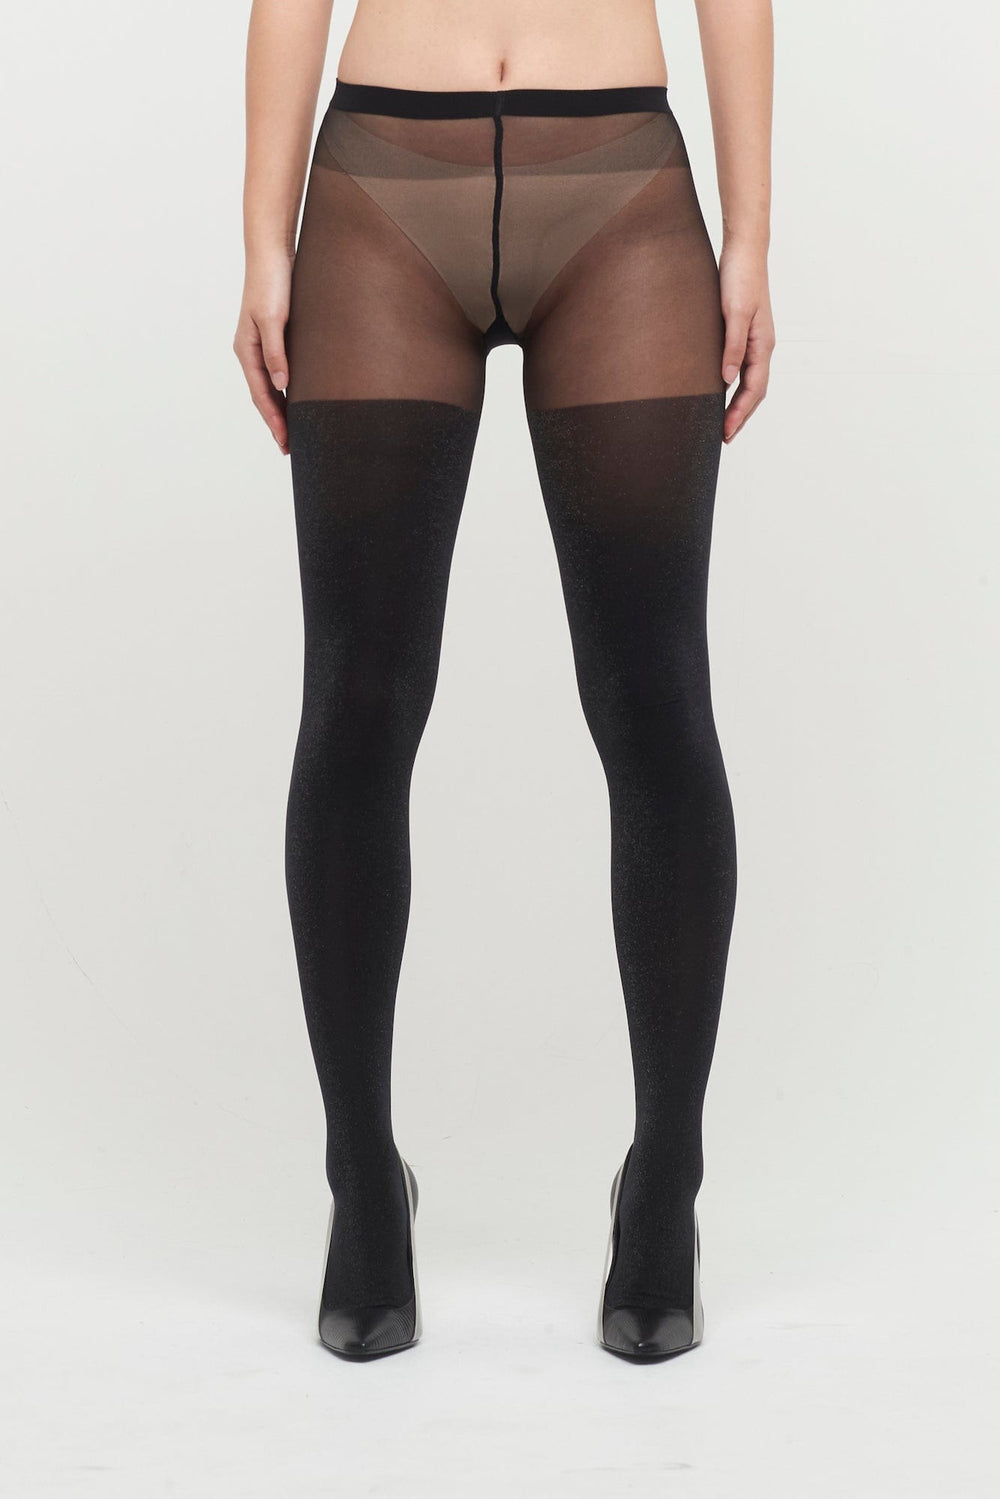 Wolford Shiny Sheer Tights – Antidote Fashion and Lifestyle